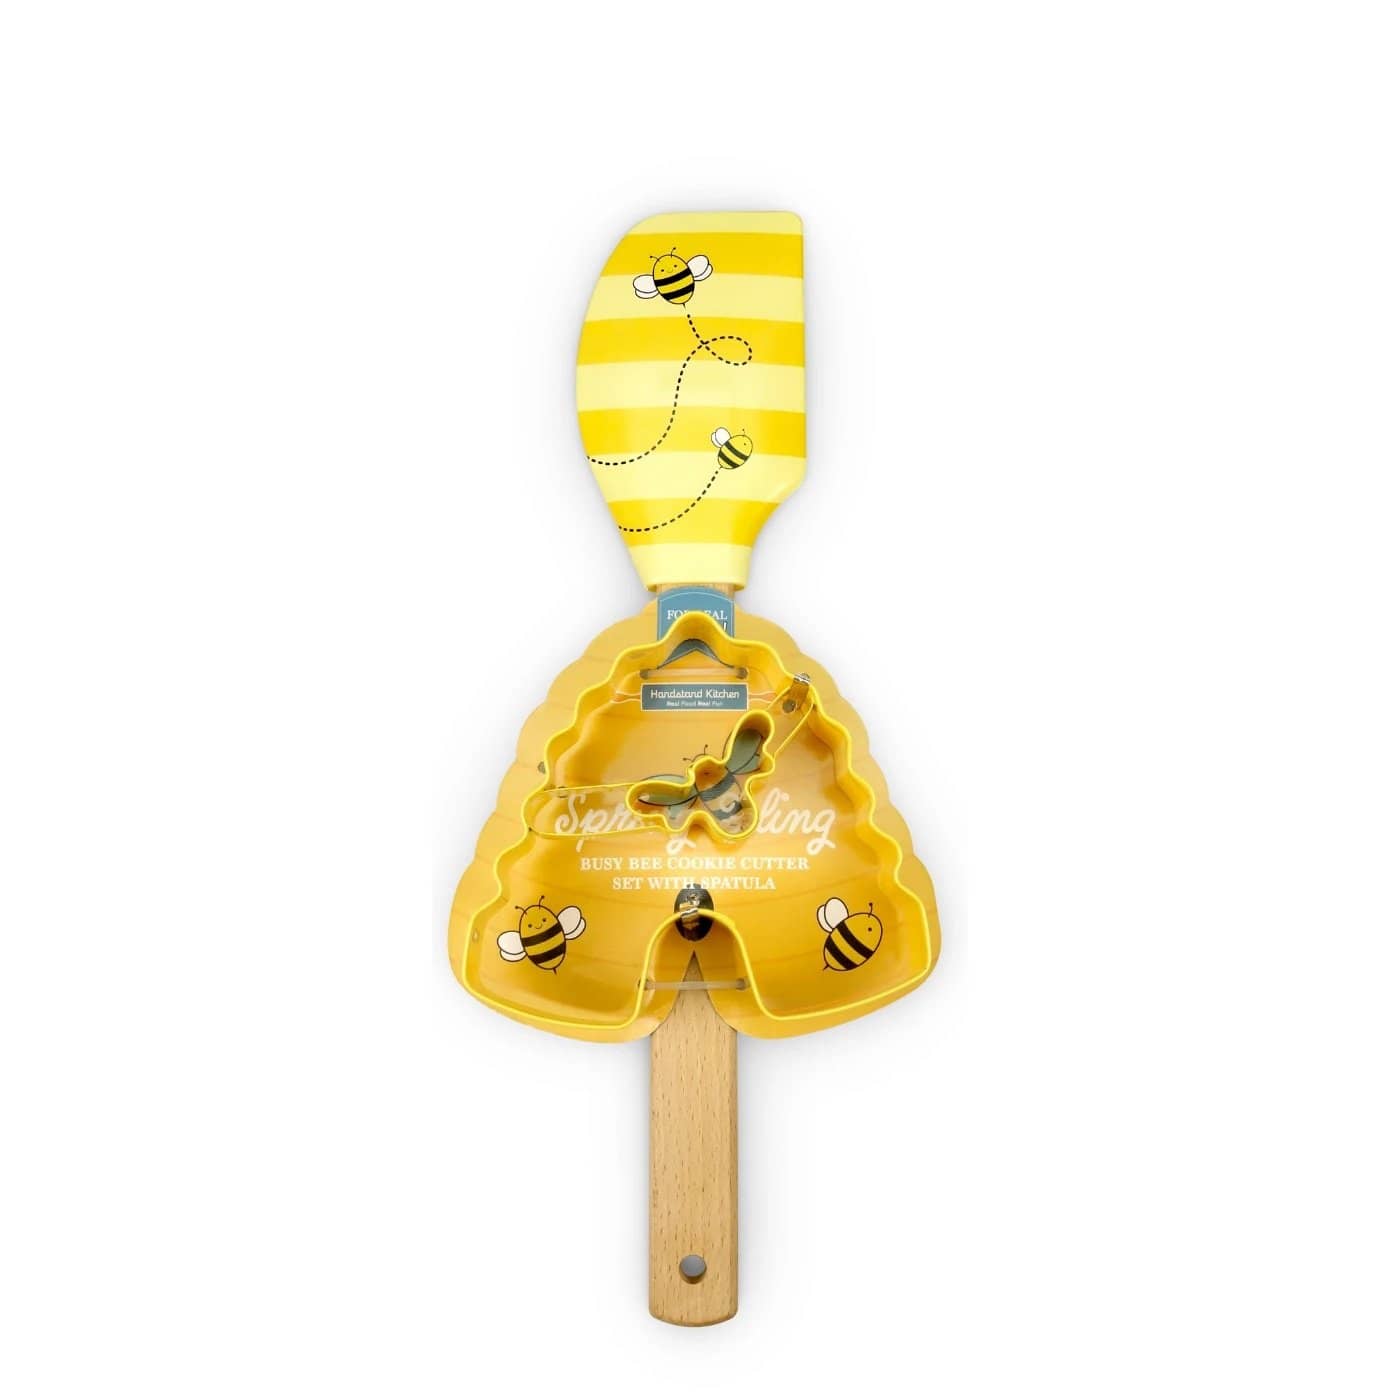 Handstand Kitchen Spring Fling Busy Bee Silicone Cupcake Mold